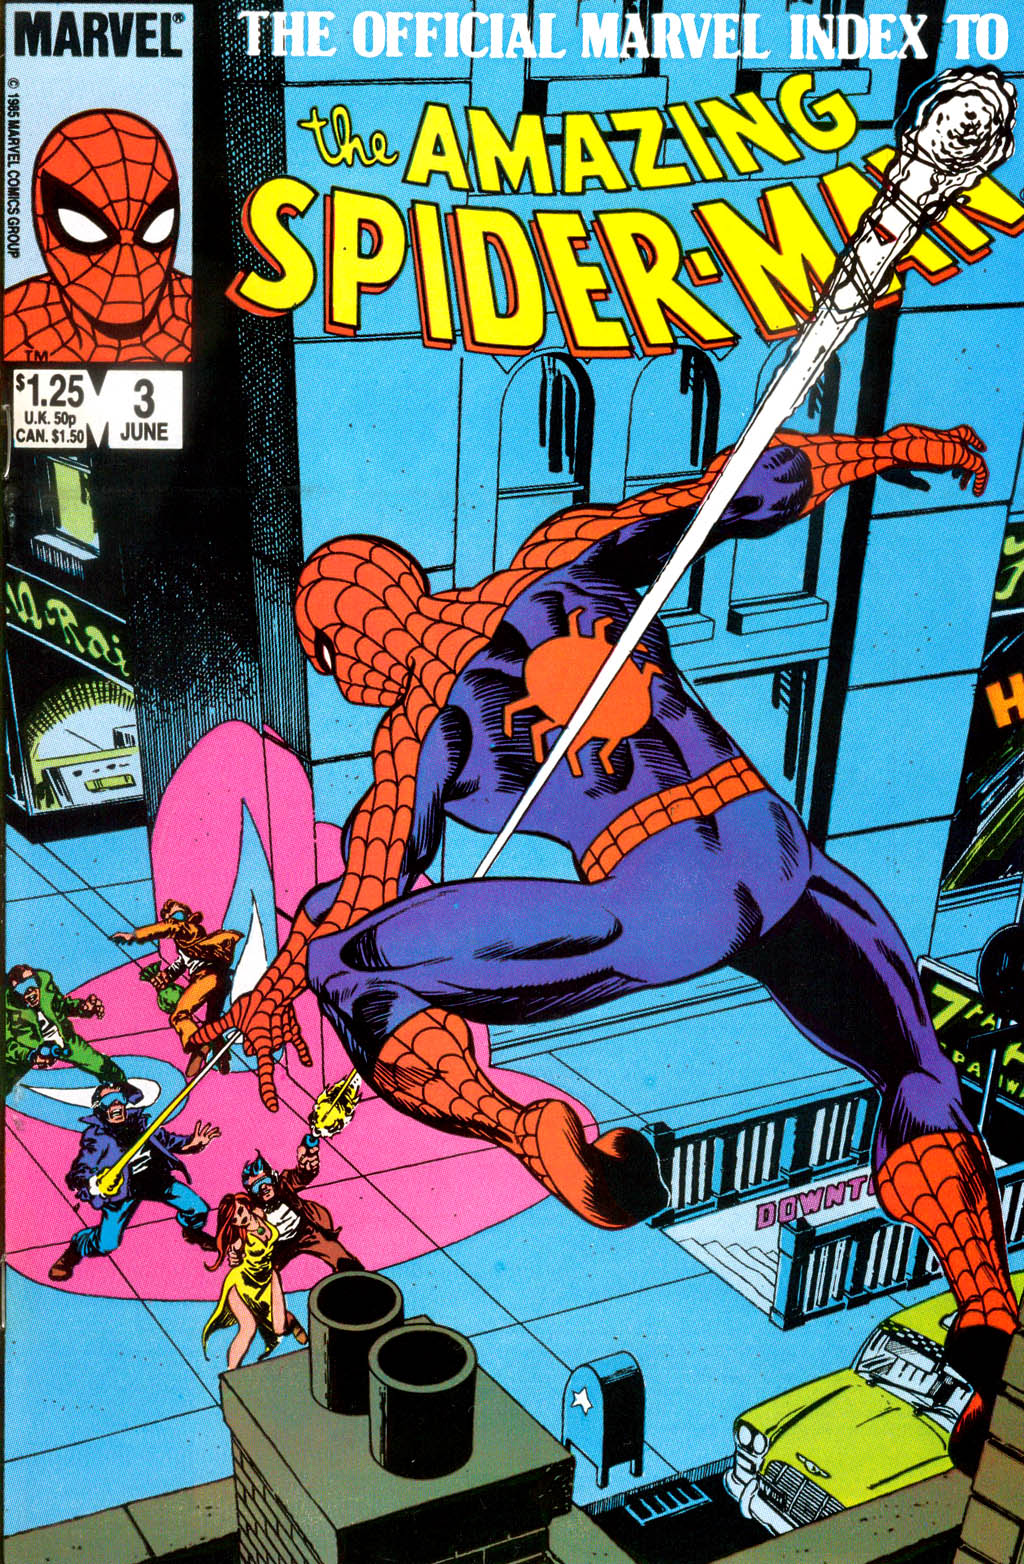 Read online The Official Marvel Index to The Amazing Spider-Man comic -  Issue #3 - 1